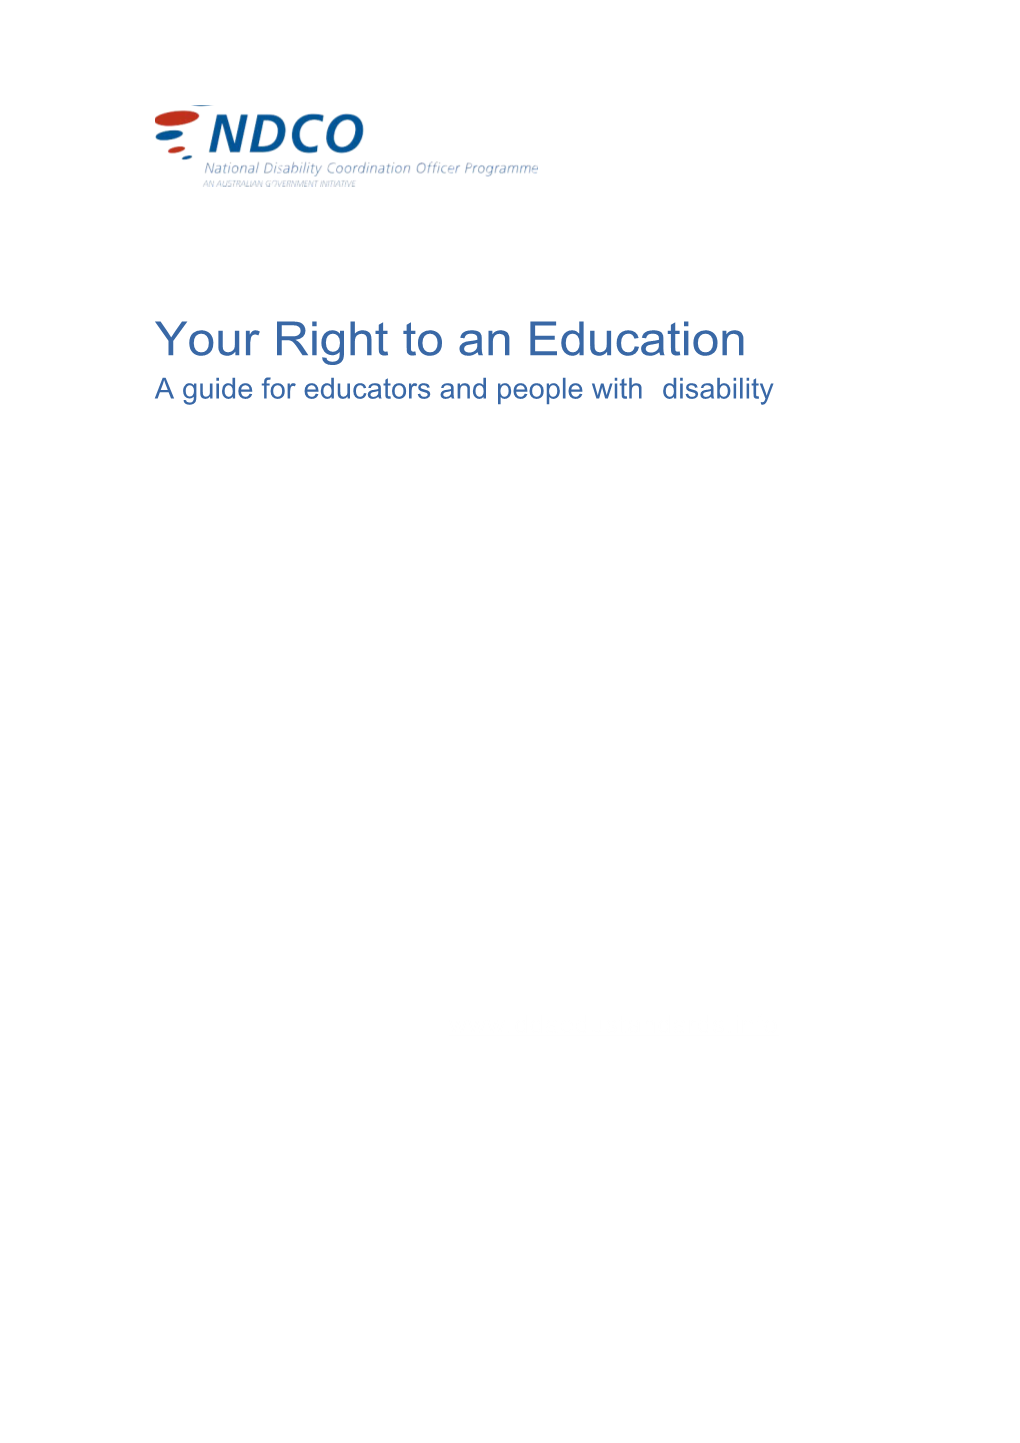 A Guide for Educators and People with Disability